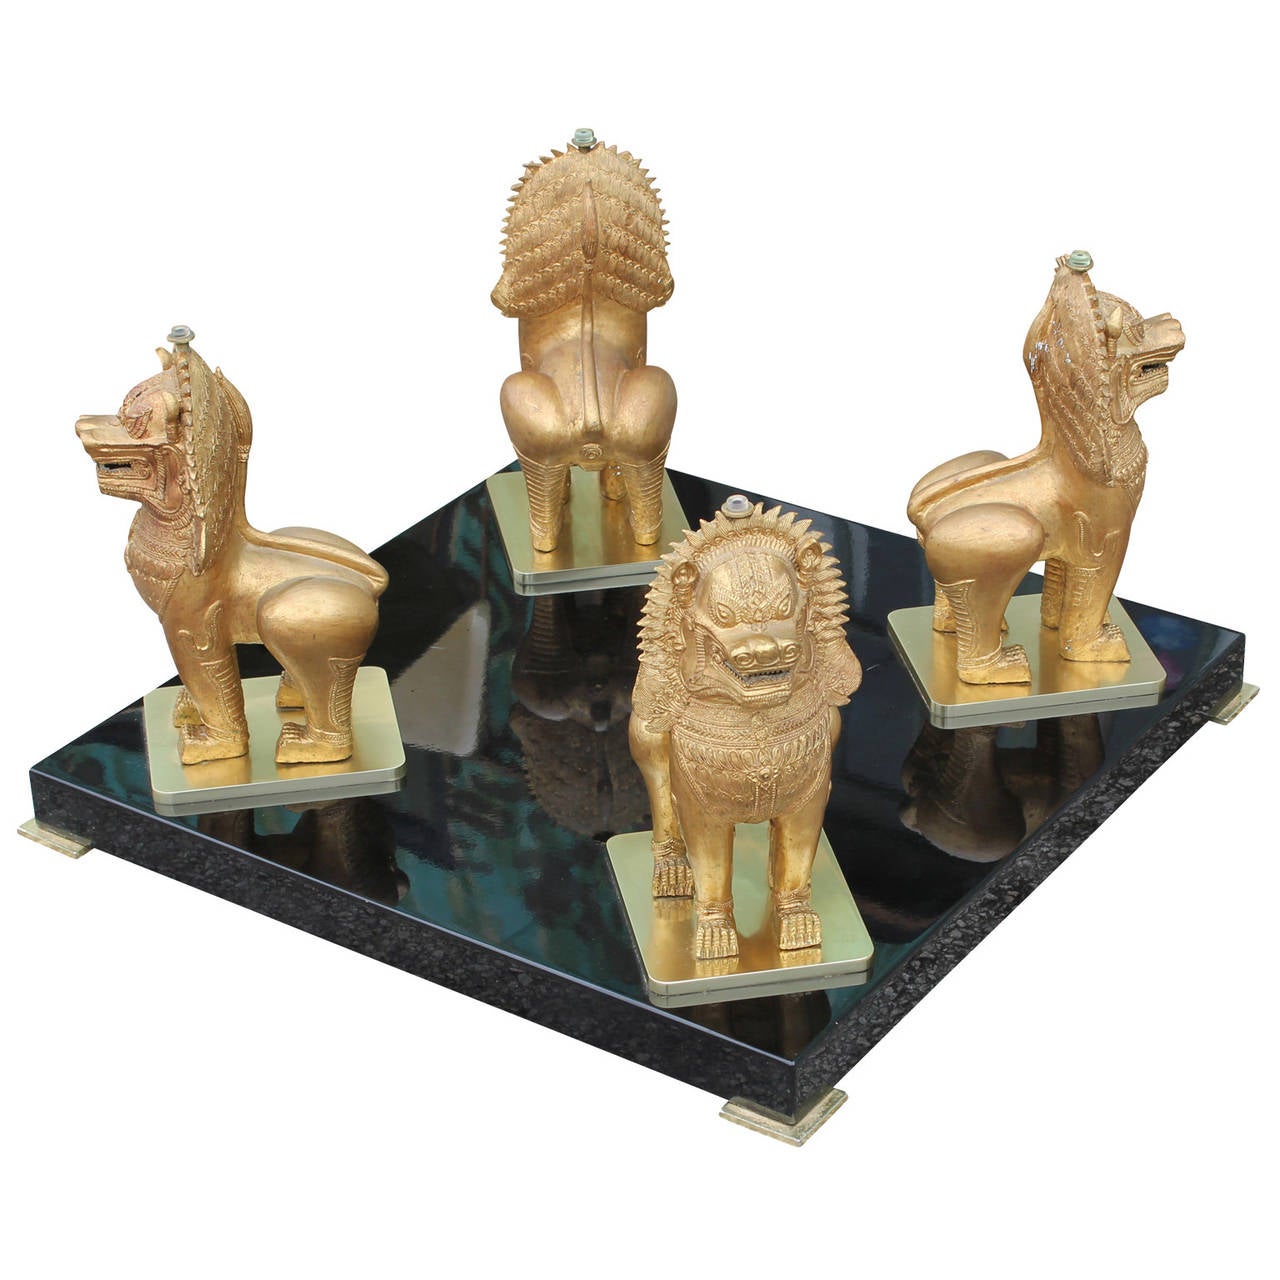 Stunning coffee or cocktail table. Four ornate Foo dogs sit atop a simple black Lacqured base with brass feet. A heavy beveled glass top rests upon the dogs' heads.